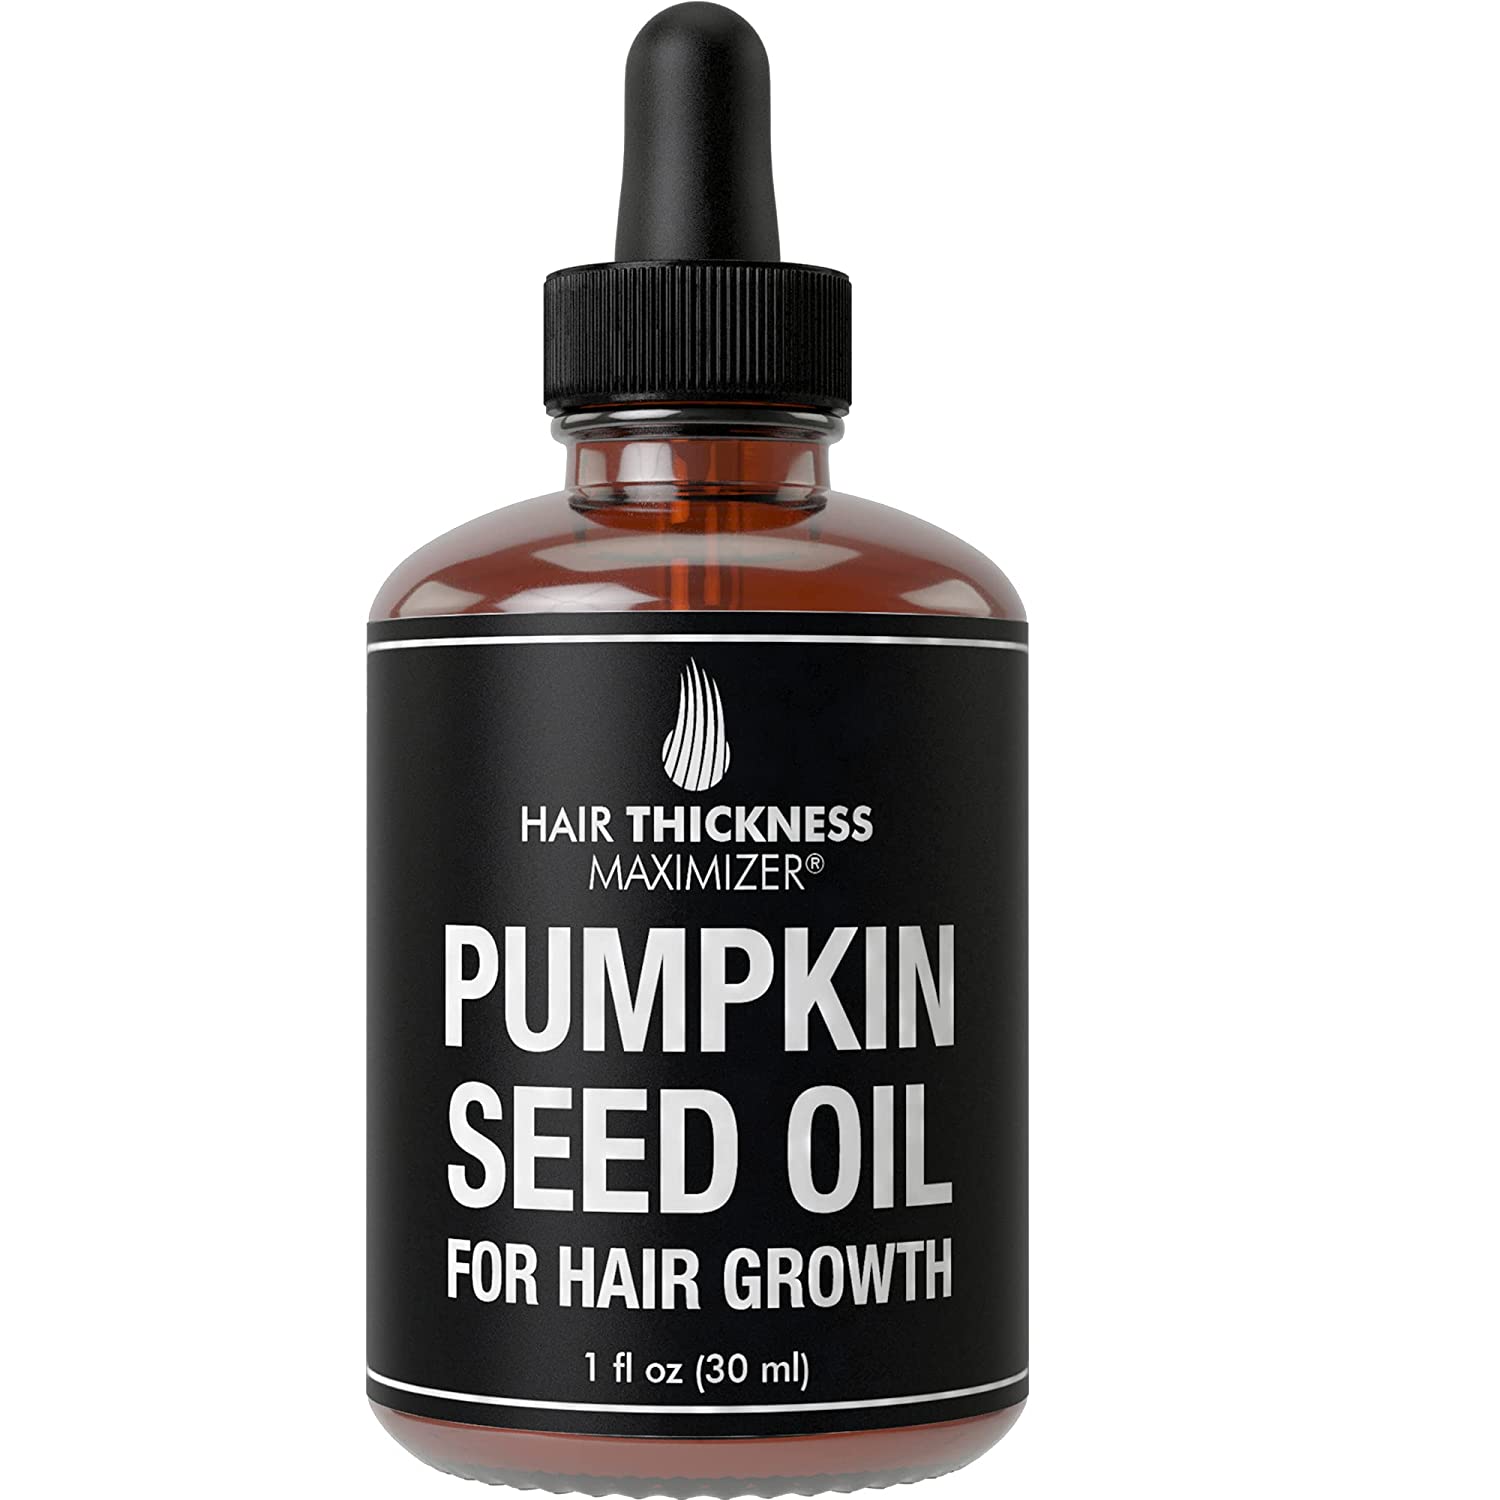 Buy 16Oz: Pumpkin Seed Oil Unrefined Organic Carrier Cold Pressed